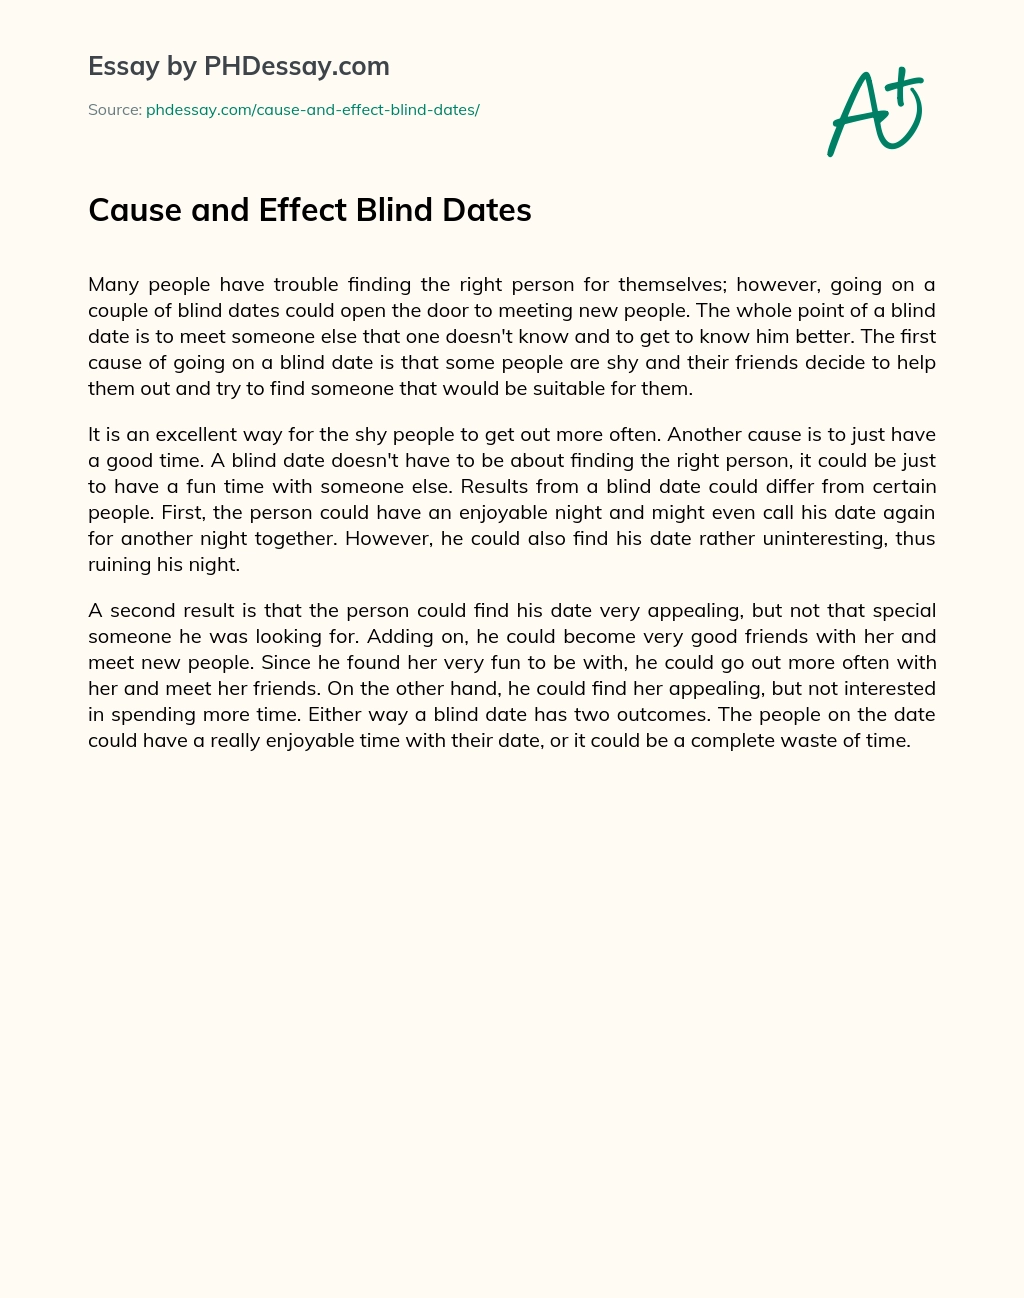 Cause and Effect Blind Dates essay